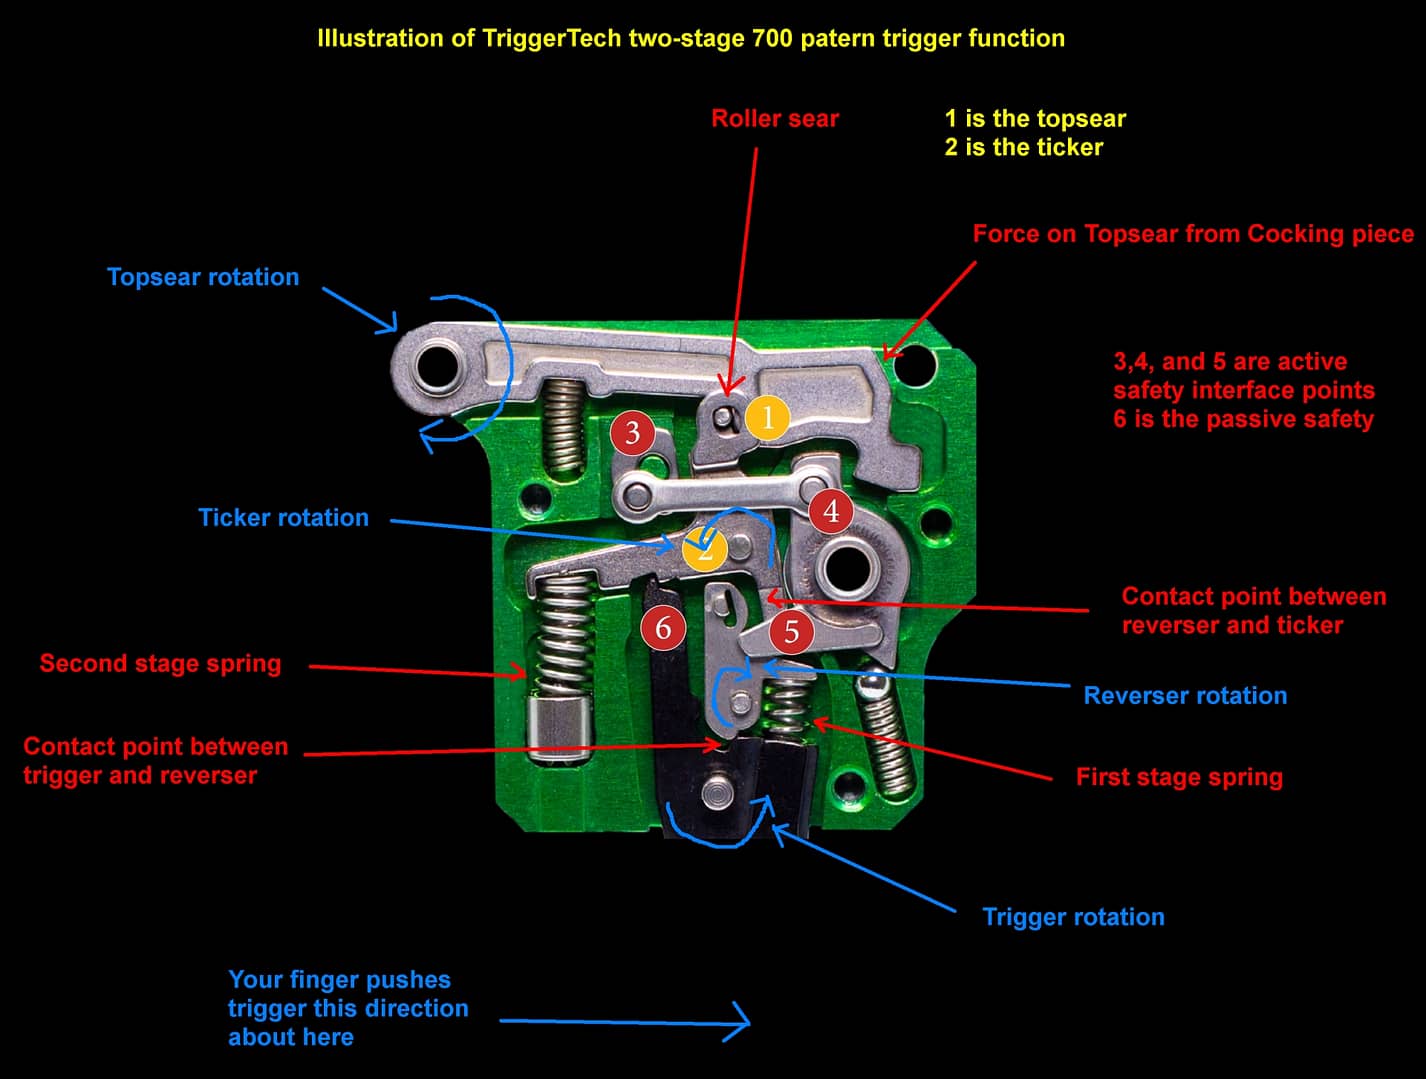 Illustrated diagram of the TriggerTech two-stage 700 platform trigger function.